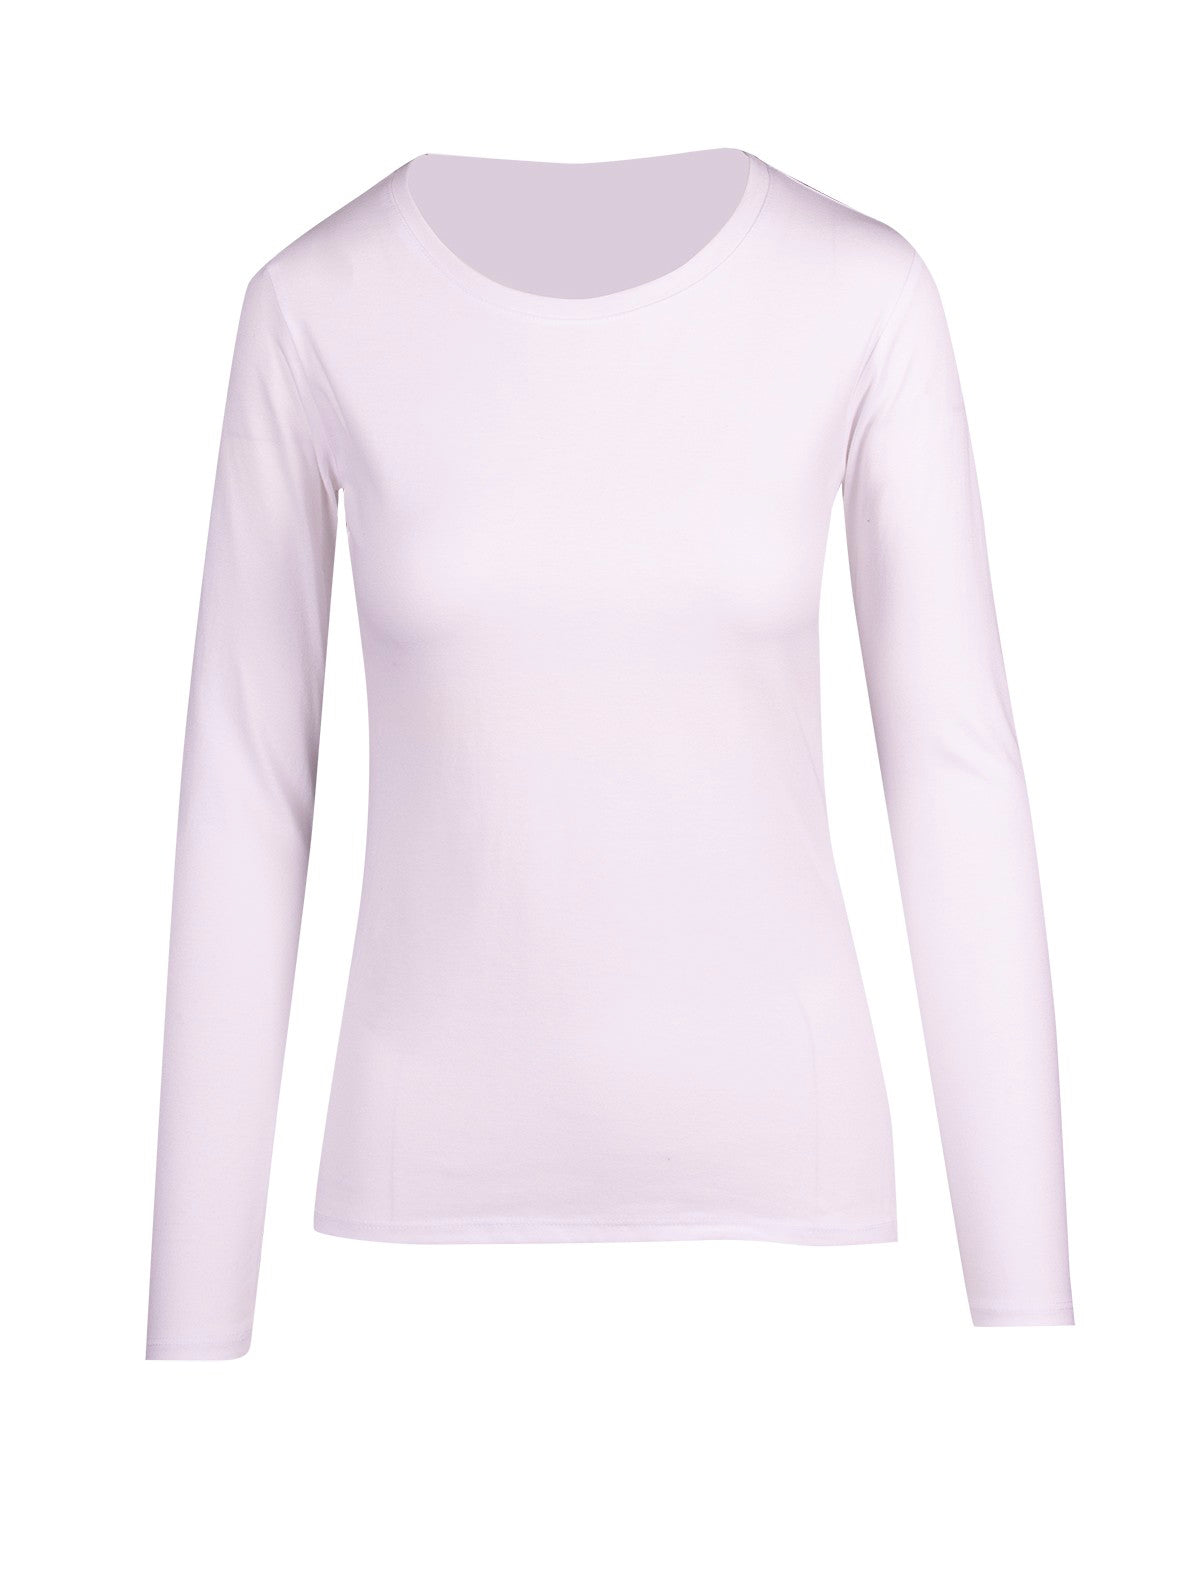 Casey Long Sleeve Top.  It's made of 100% fine cotton jersey, perfect for layering on those cooler days. It has a slim fit long cut, a round neck, and comes in black and white.